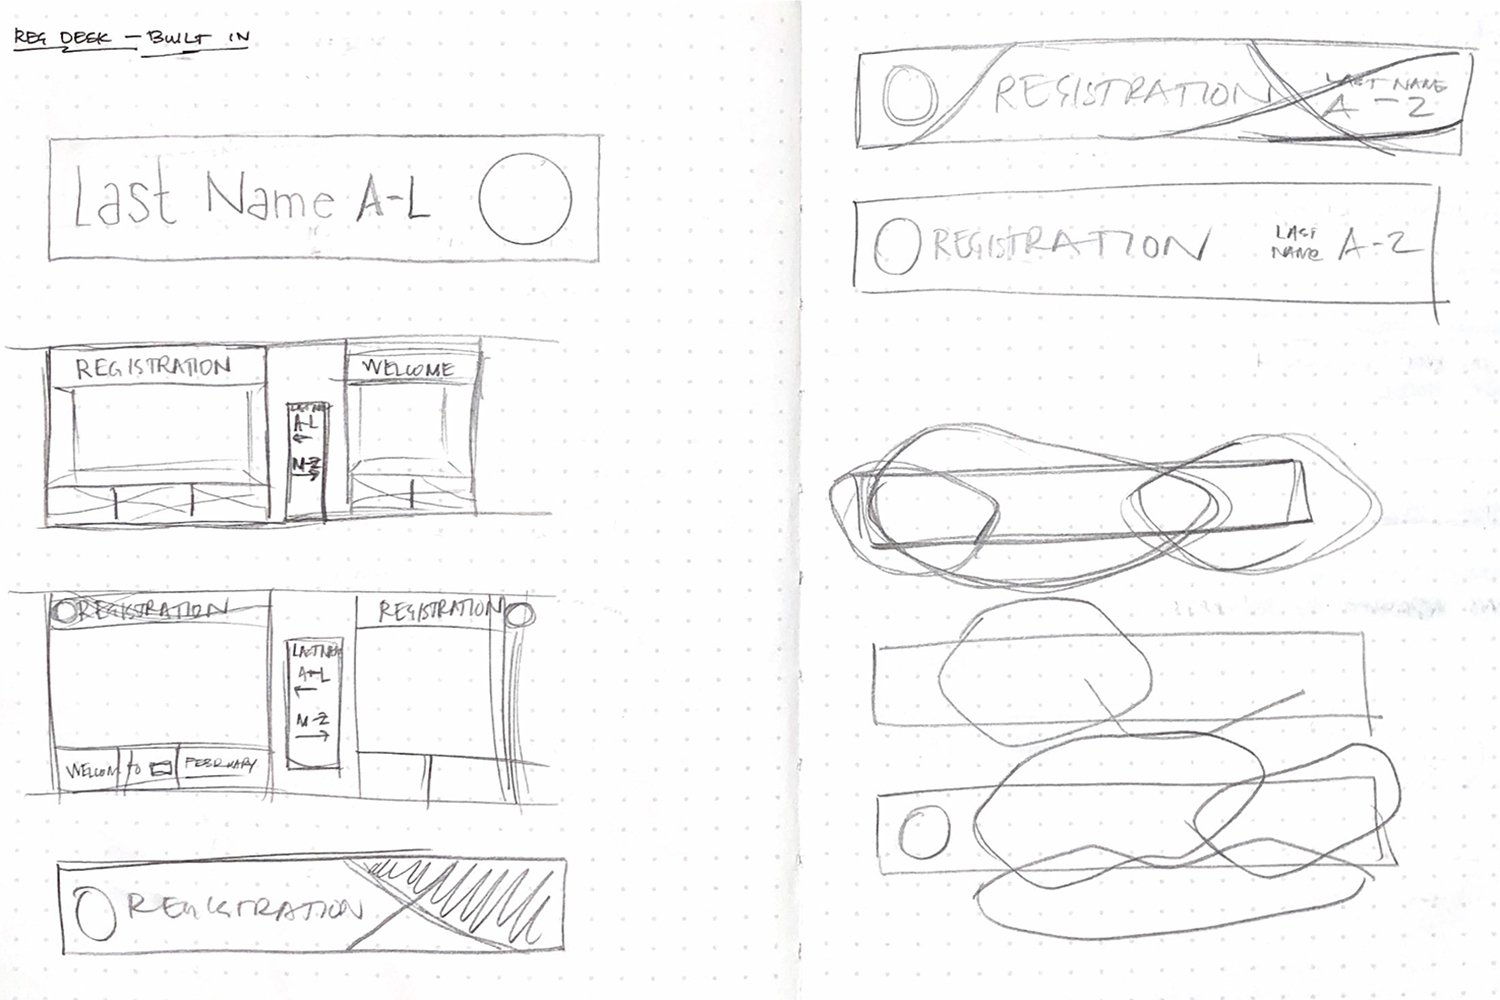   SKETCH:  Ideation stage of registration booth sign installation 